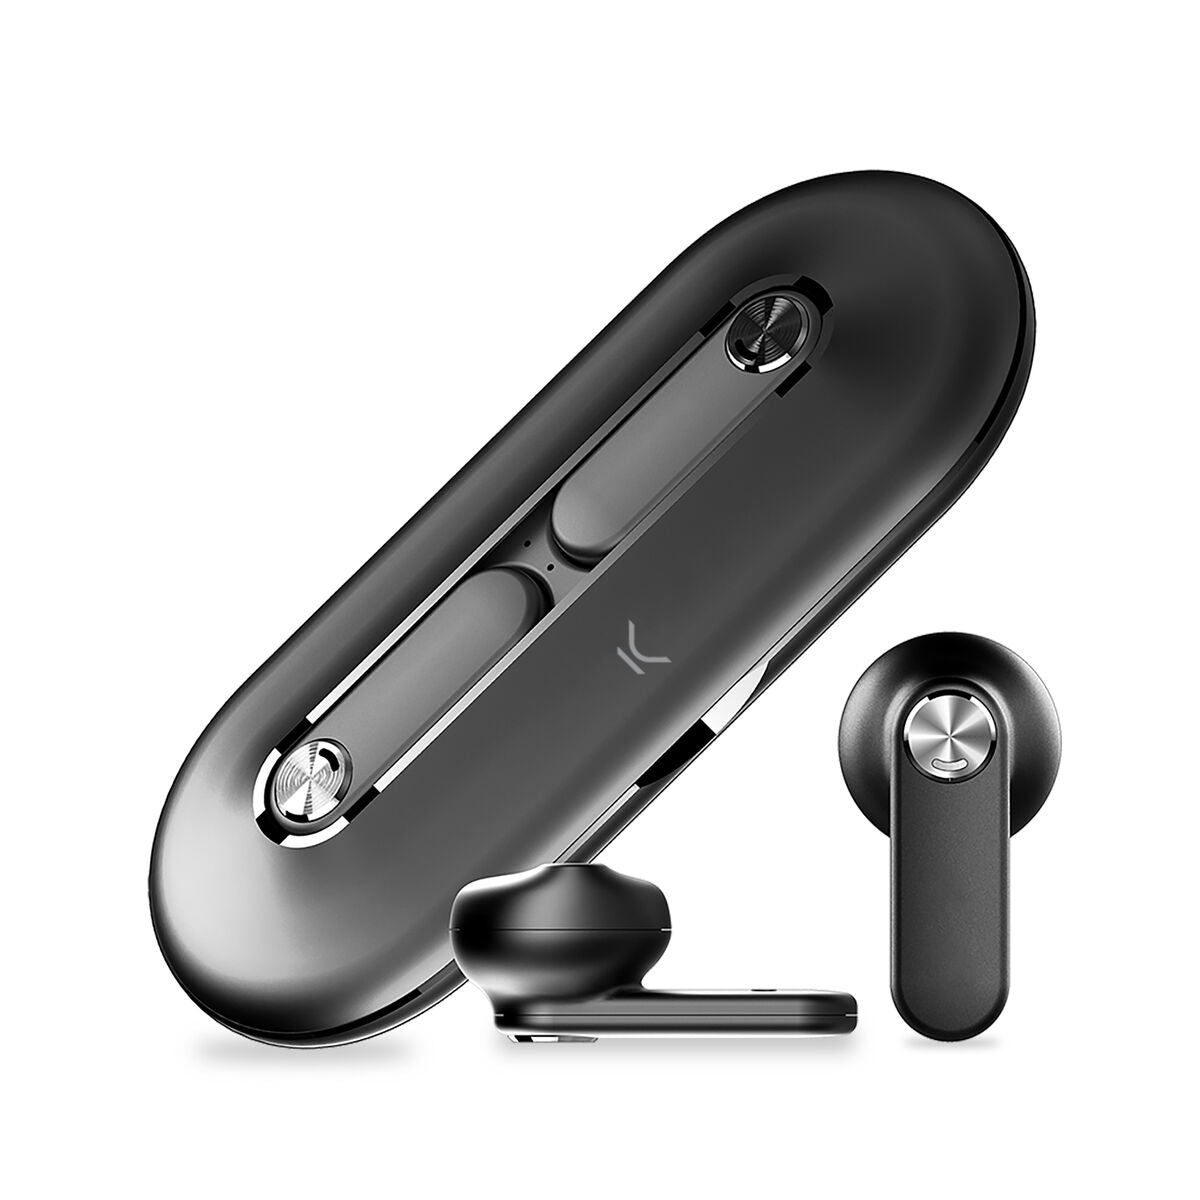 Wireless Headphones KSIX Leaf, KSIX, Electronics, Mobile communication and accessories, wireless-headphones-ksix-leaf, :Wireless Headphones, Brand_KSIX, category-reference-2609, category-reference-2642, category-reference-2847, category-reference-t-19653, category-reference-t-21312, category-reference-t-4036, category-reference-t-4037, computers / peripherals, Condition_NEW, entertainment, gadget, music, office, Price_50 - 100, telephones & tablets, Teleworking, RiotNook